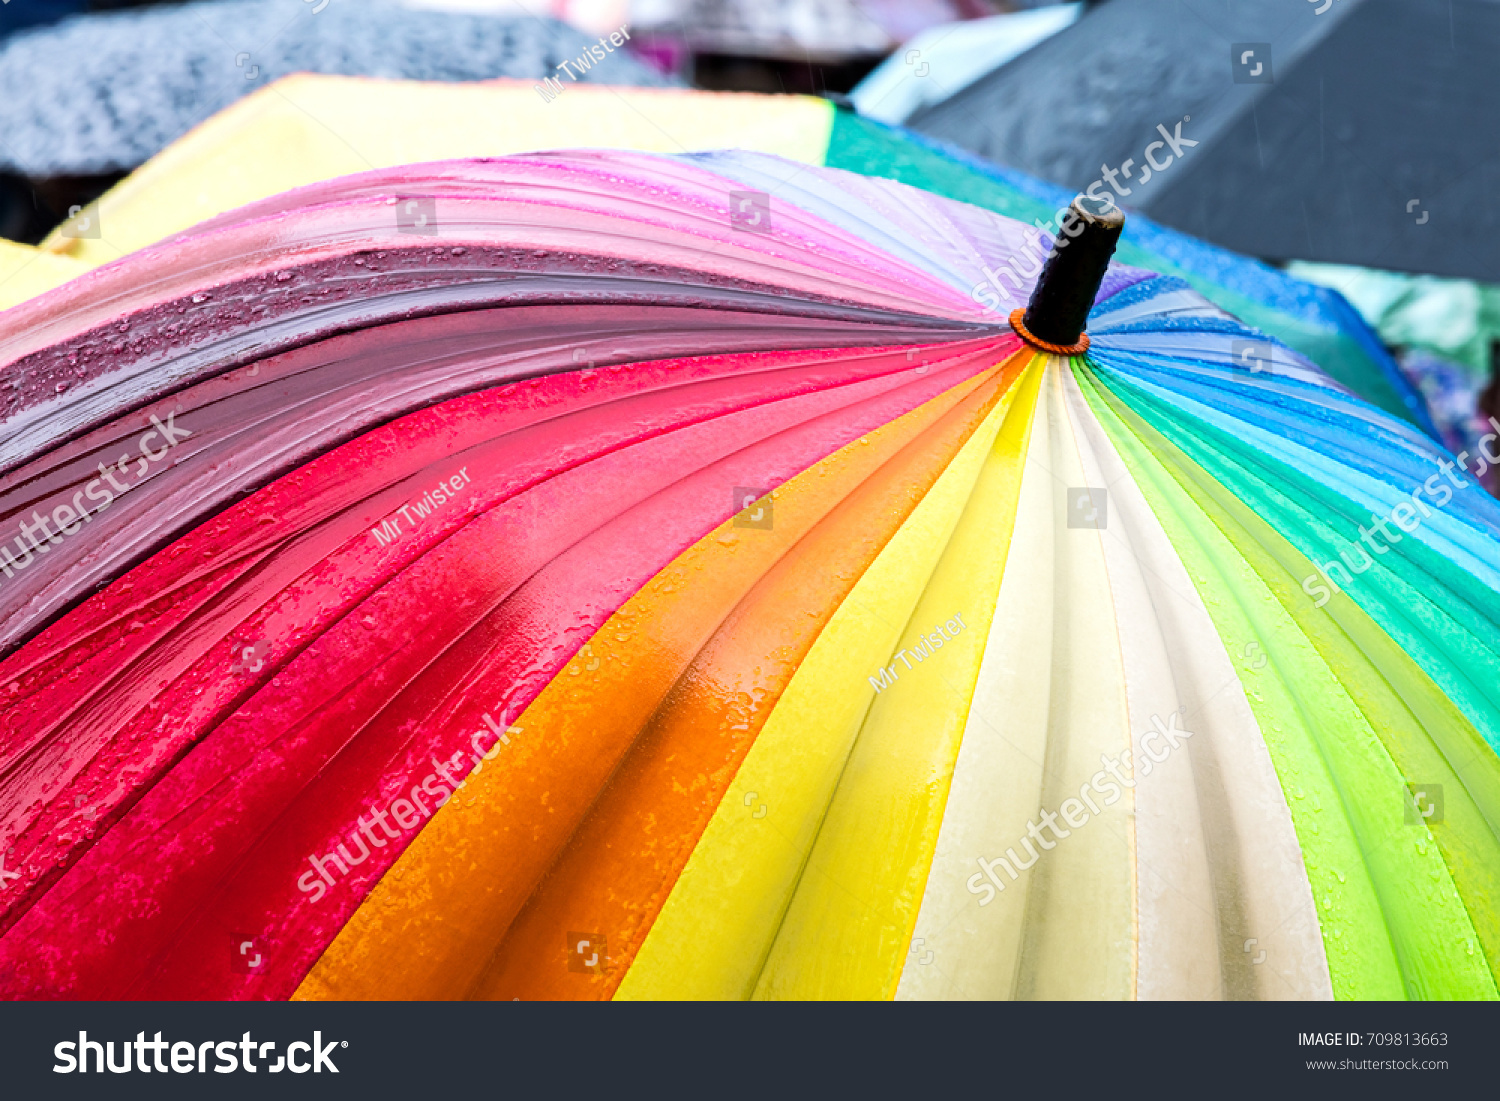 rainbow umbrella stand out from the crowd of many umbrellas in the rain #709813663